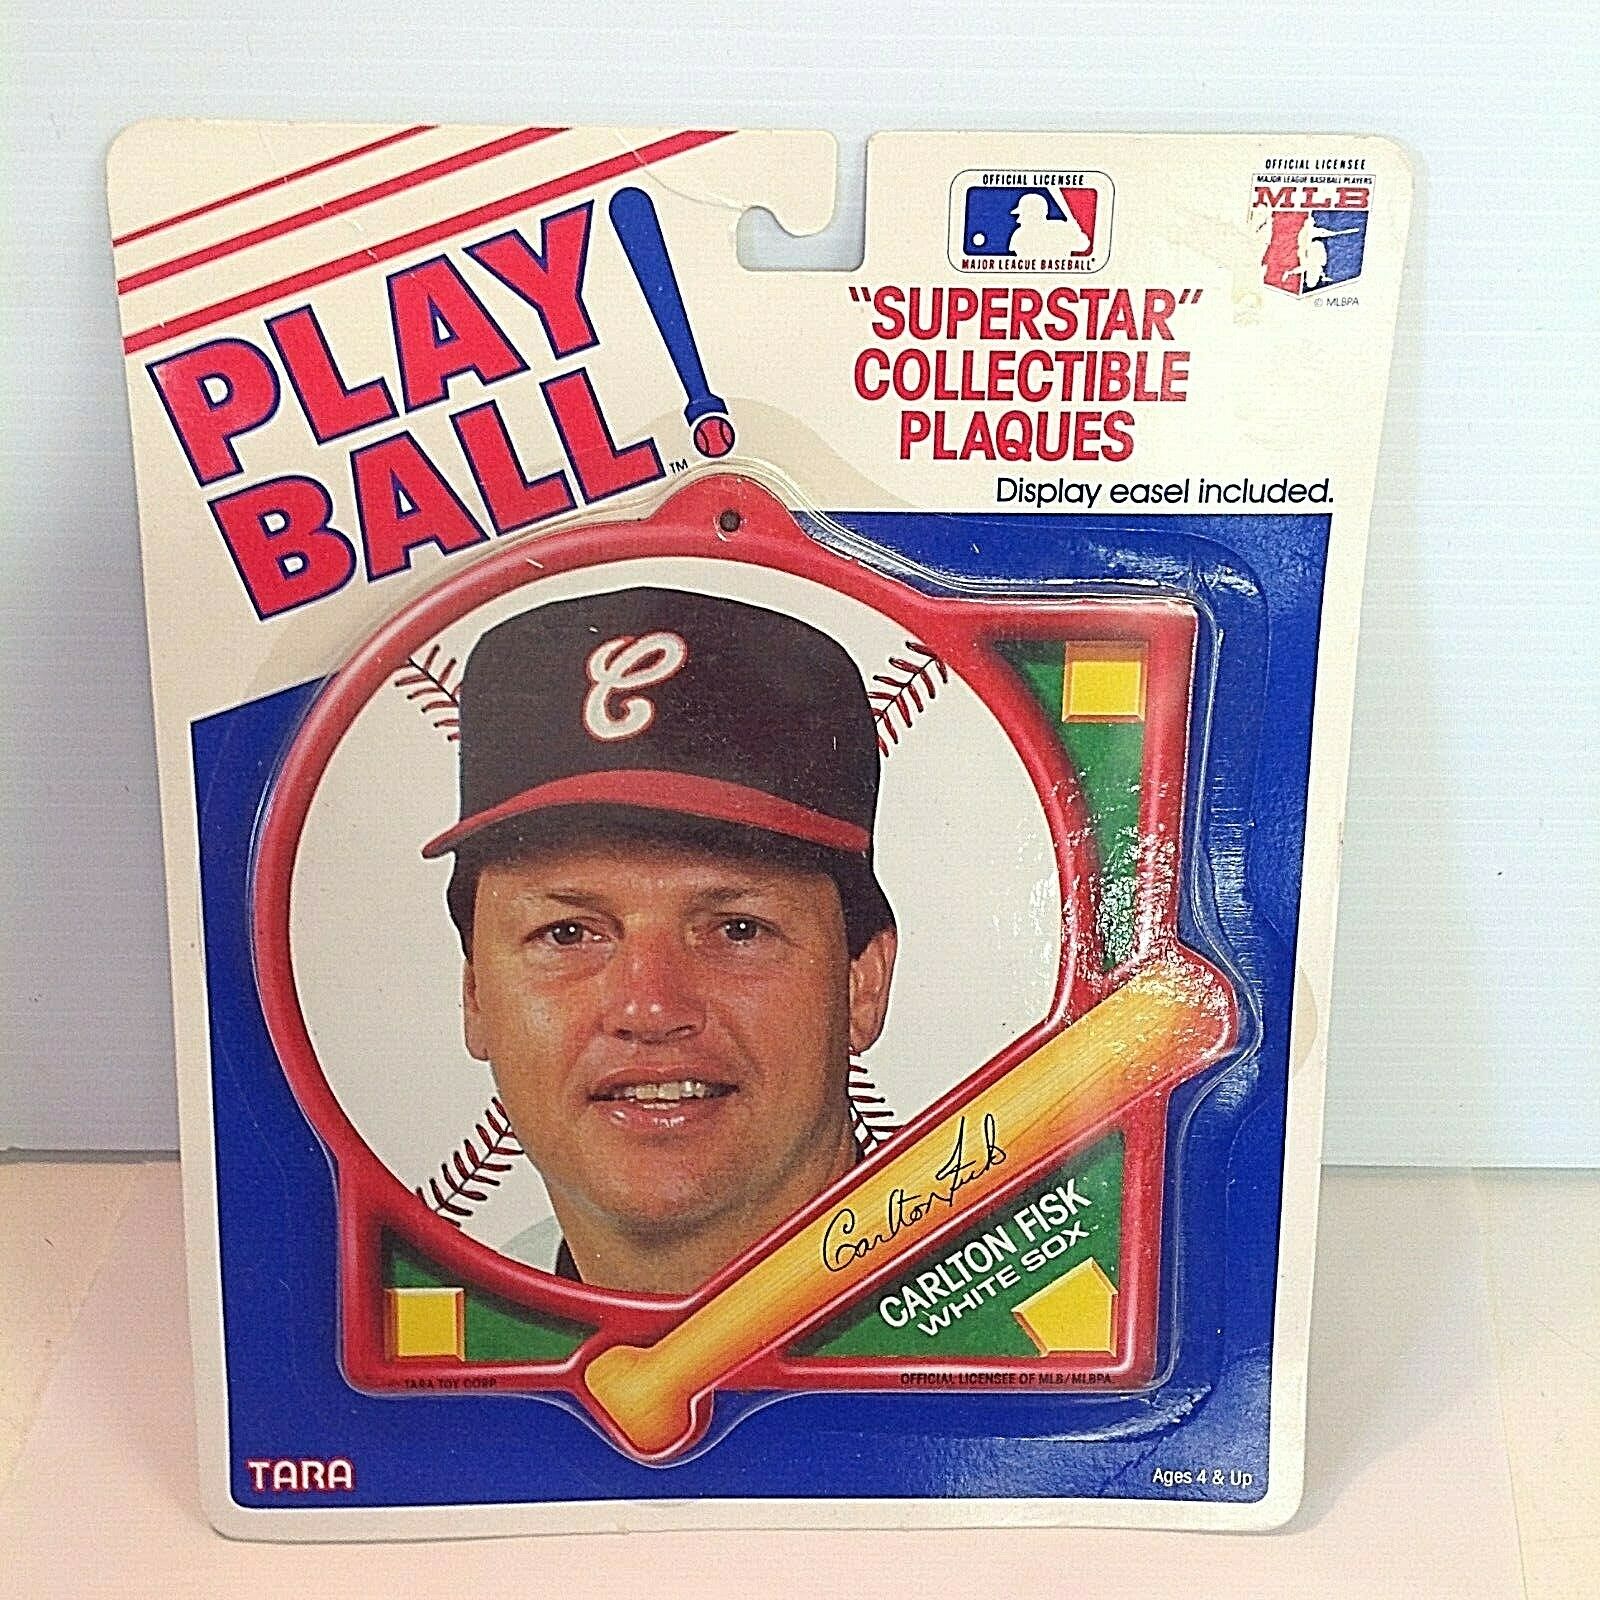 Vintage 1980's Play Ball Superstar Collectible Plaque White Sox Carlton Fisk Mlb